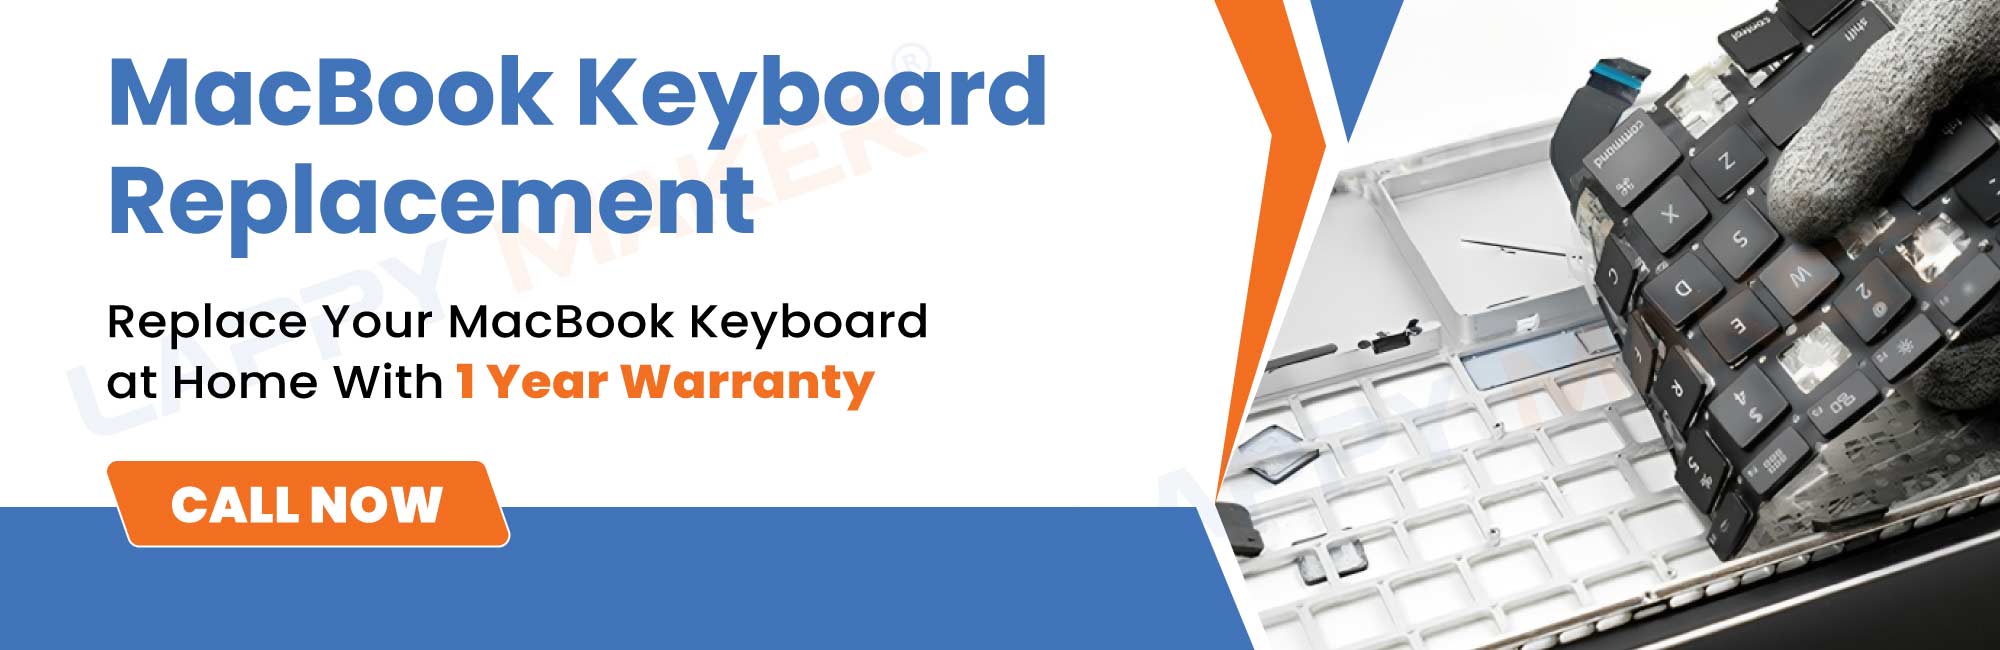 lappymaker keyboard replacement